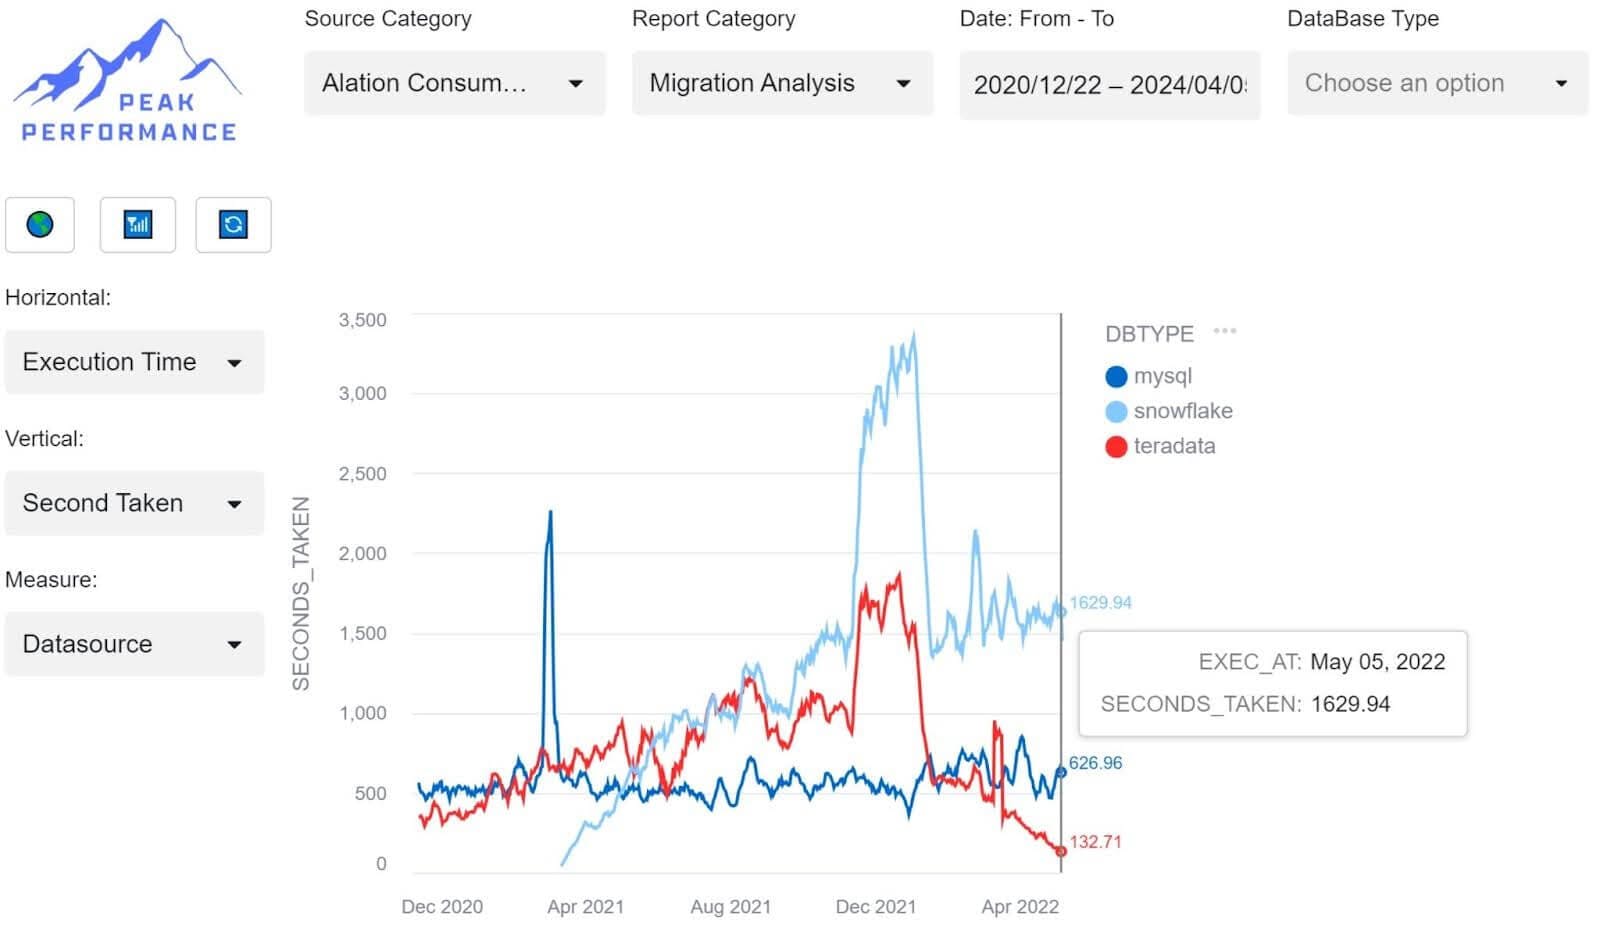 Peak Performance dashboard showing data consumption and migration analysis from Alation and Snowflake. 